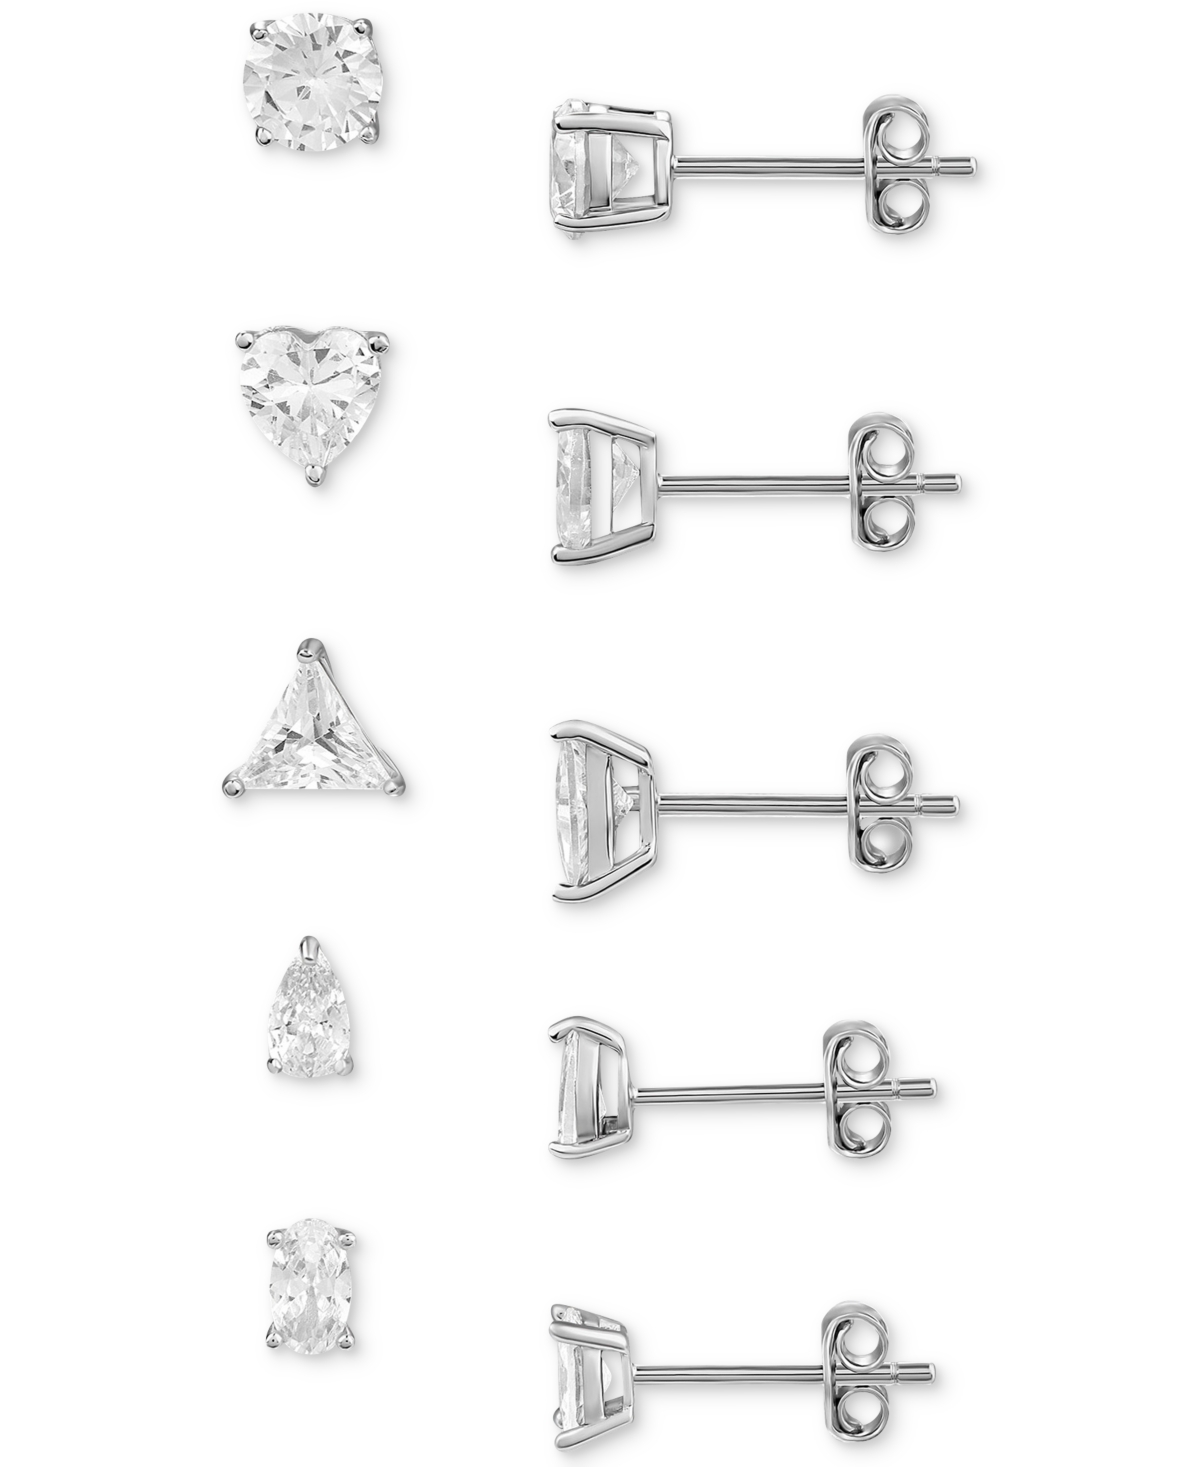 Giani Bernini 5-pc. Set Cubic Zirconia Solitaire Multi-cut Stud Earrings In Sterling Silver, Created For Macy's